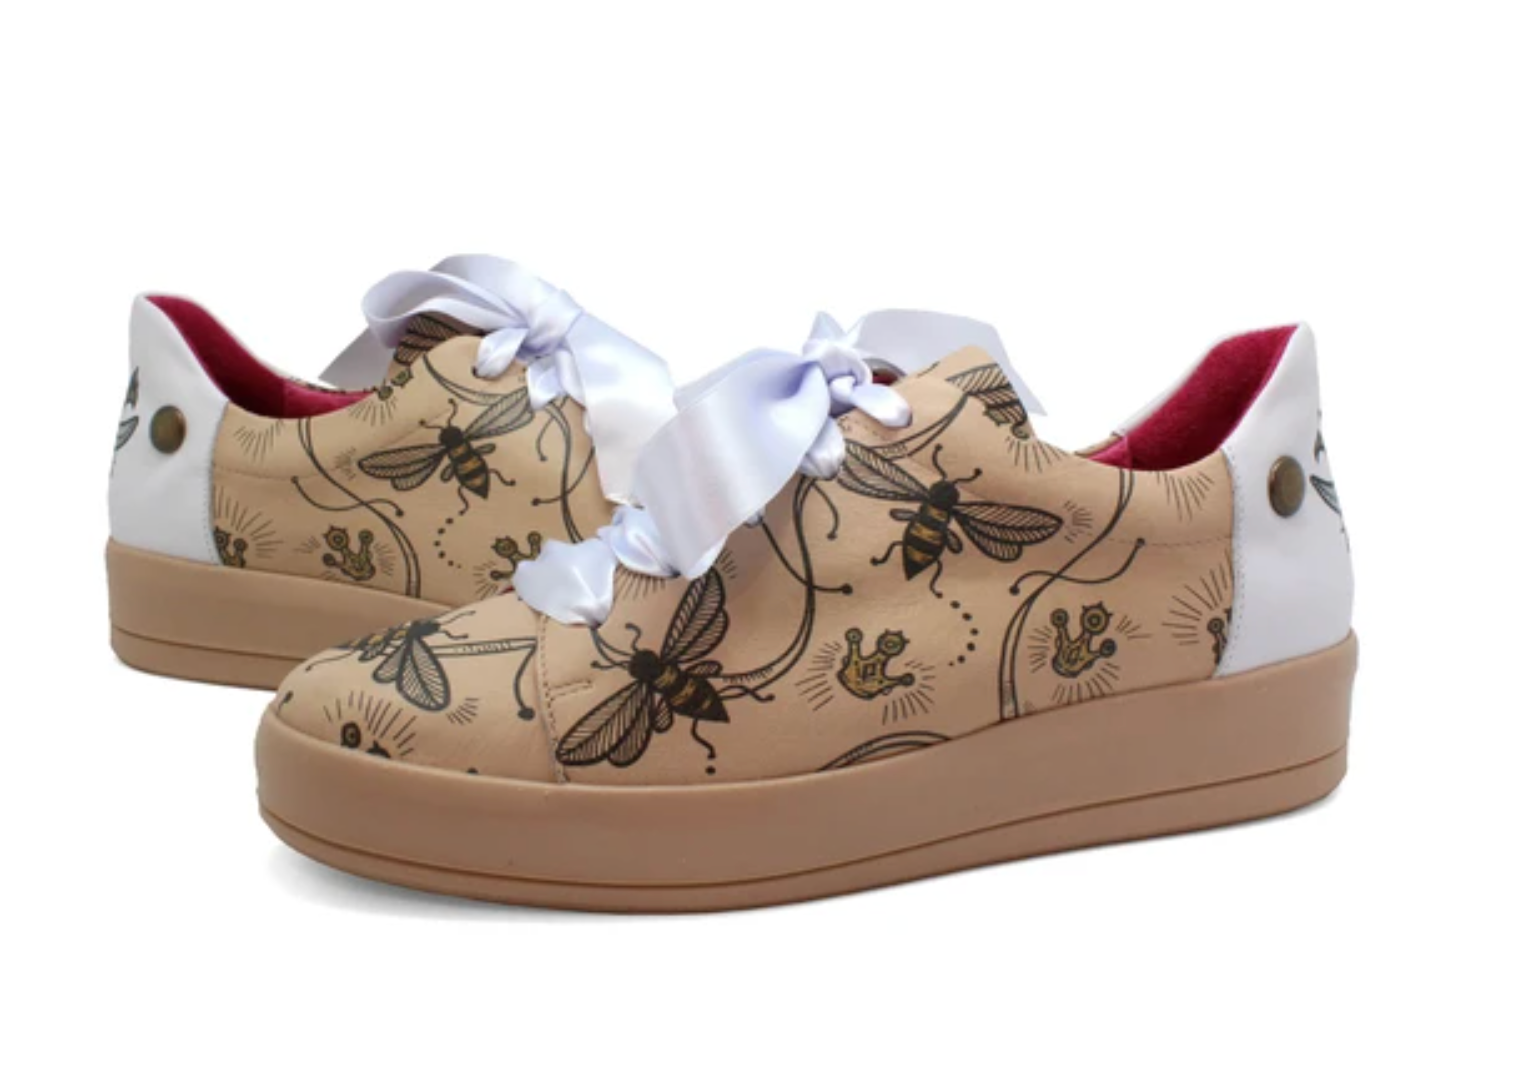 Chanii B "Luxe Royal" Nude/Bee Doodle Sneaker